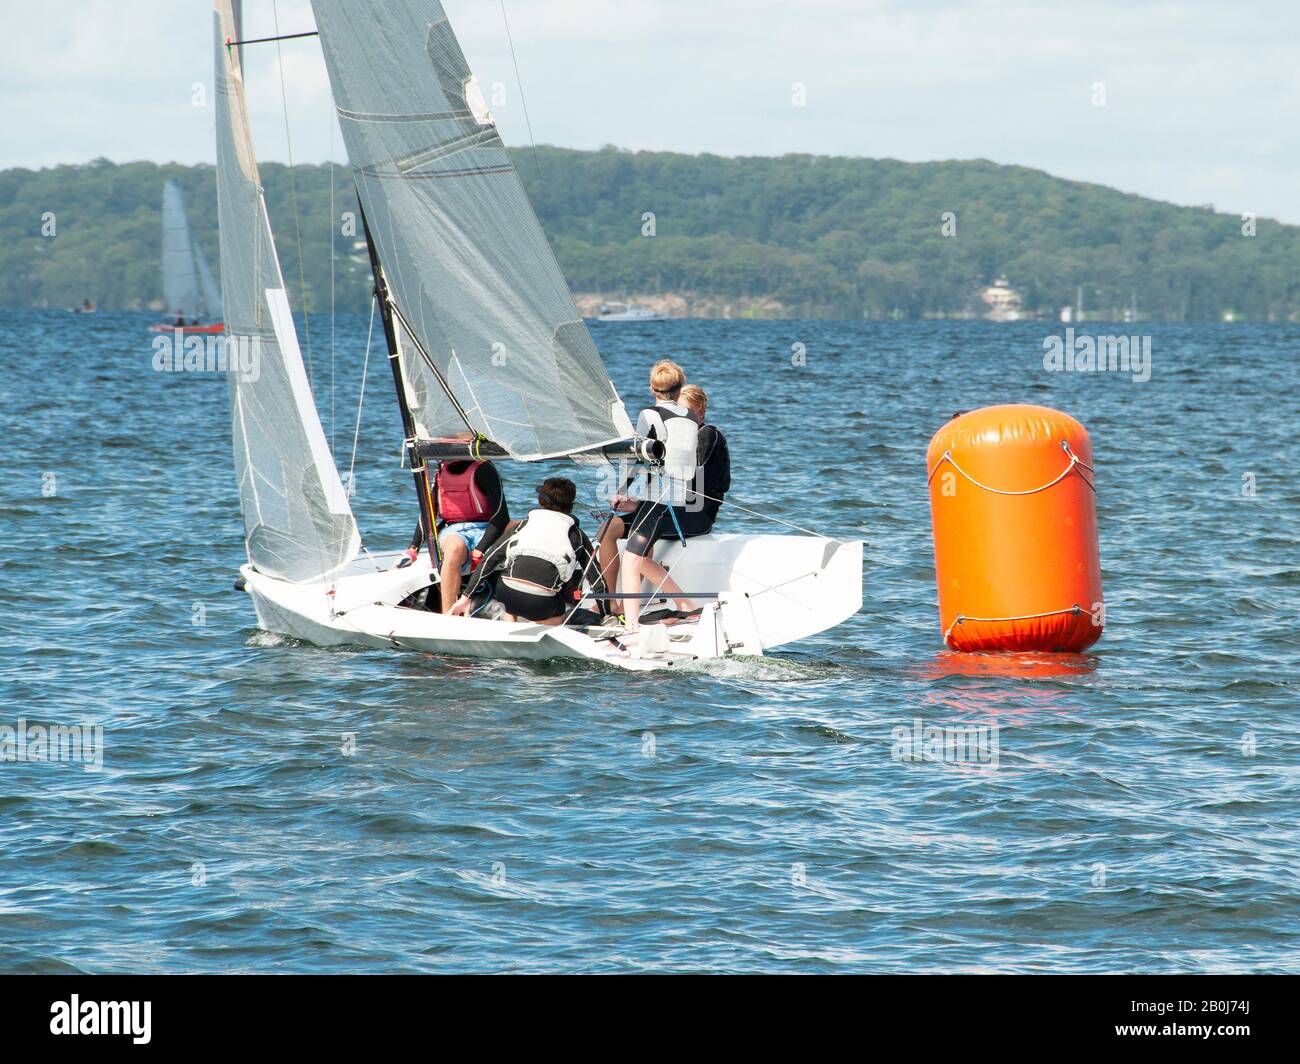 Young boys Racing small sailboat, rounding an orange marker. Teamwork by junior sailors racing on saltwater Lake Macquarie. Photo for commercial use. Stock Photo